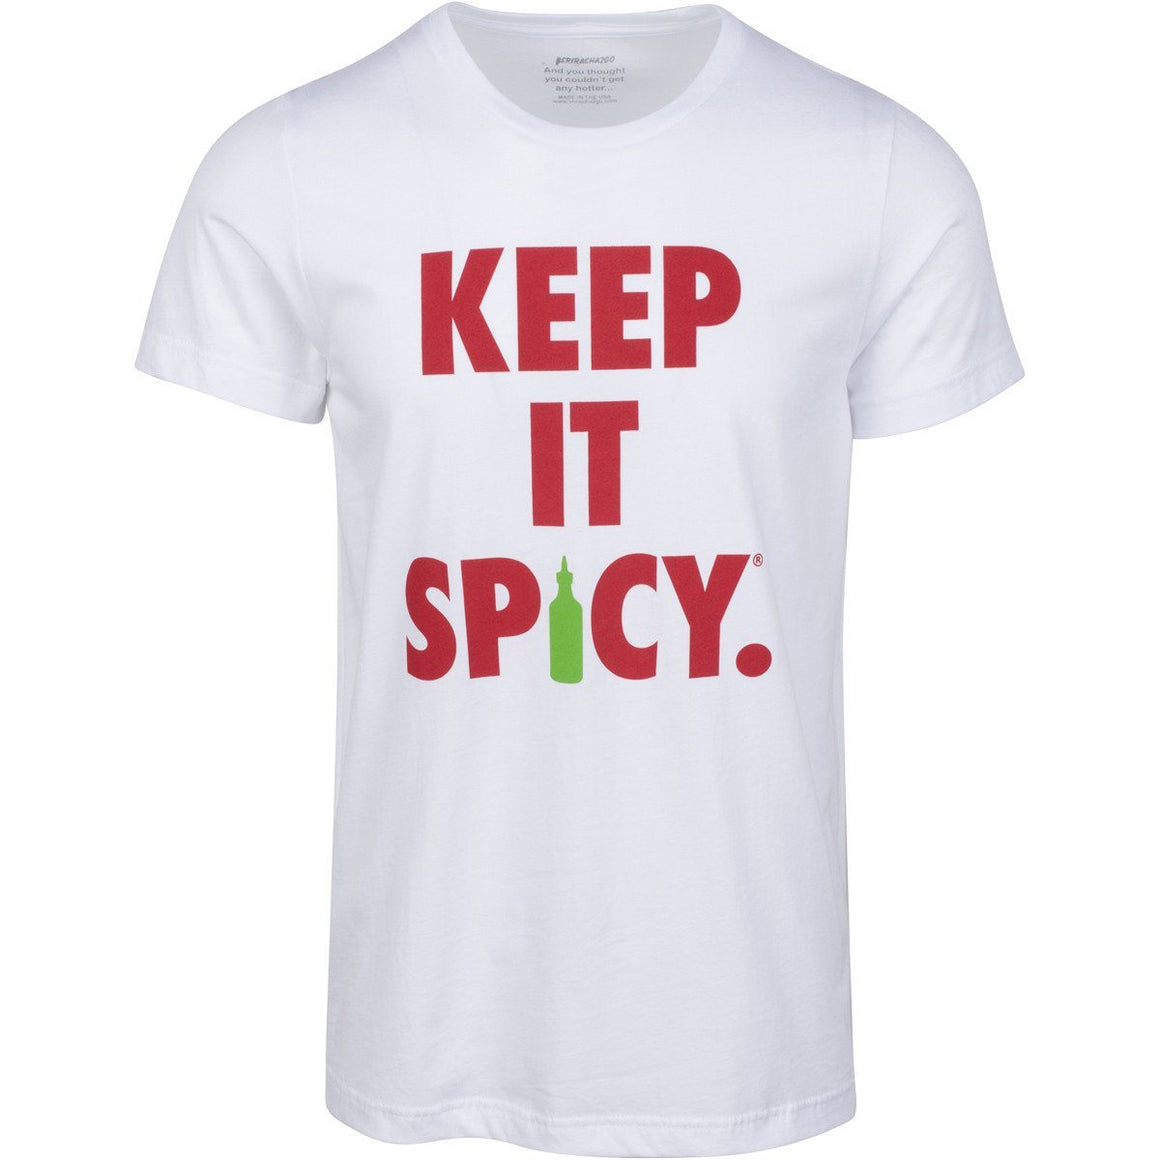 Apparel - Keep It Spicy Tee, White